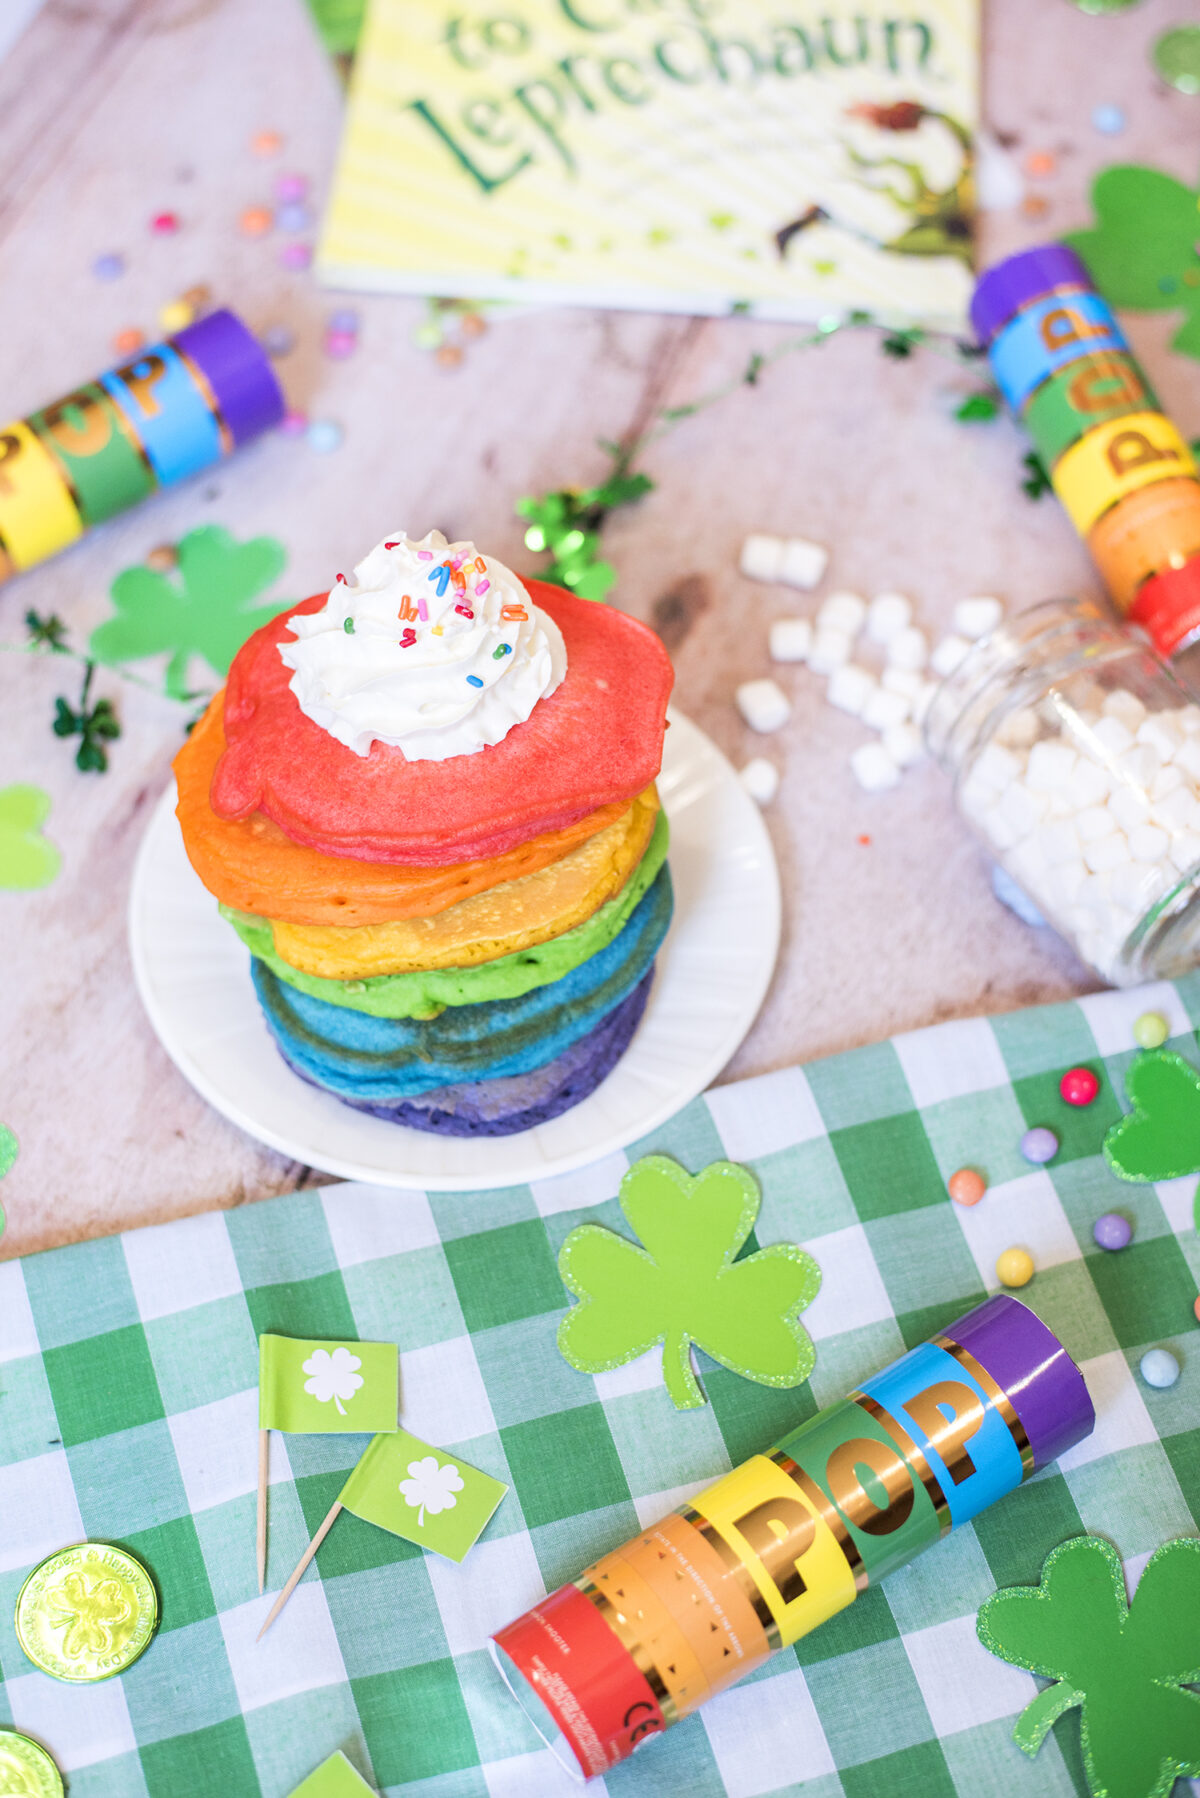 Celebrate St. Patrick's Day with rainbow pancakes and a scavenger hunt to find the leprechaun's gold coins!
